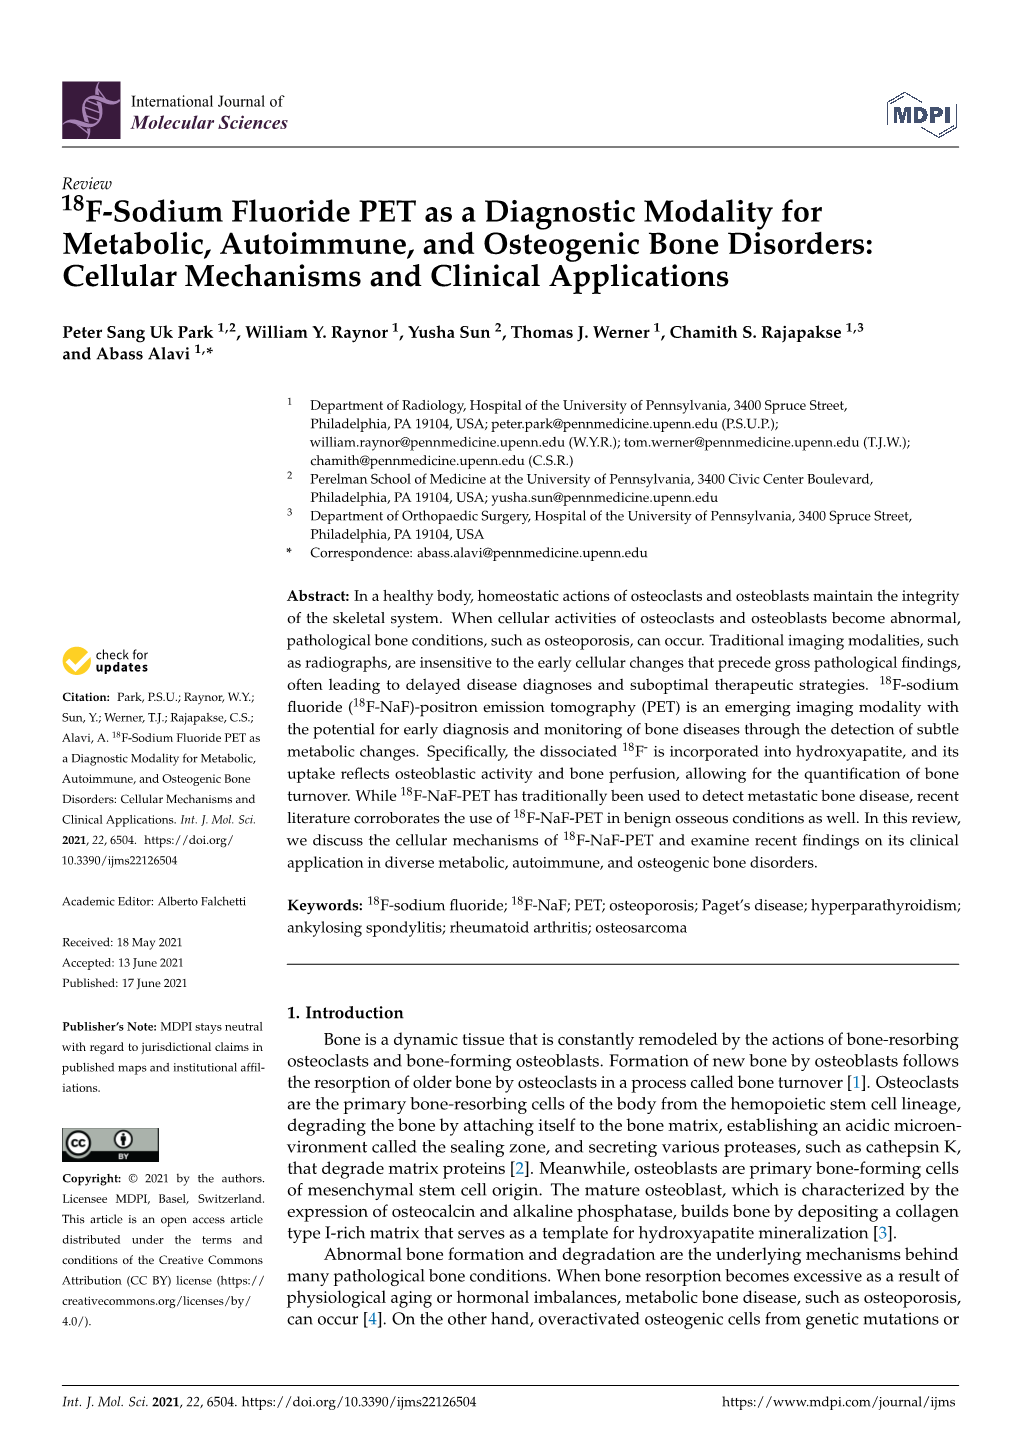 18F-Sodium Fluoride PET As a Diagnostic Modality for Metabolic, Autoimmune, and Osteogenic Bone Disorders: Cellular Mechanisms and Clinical Applications